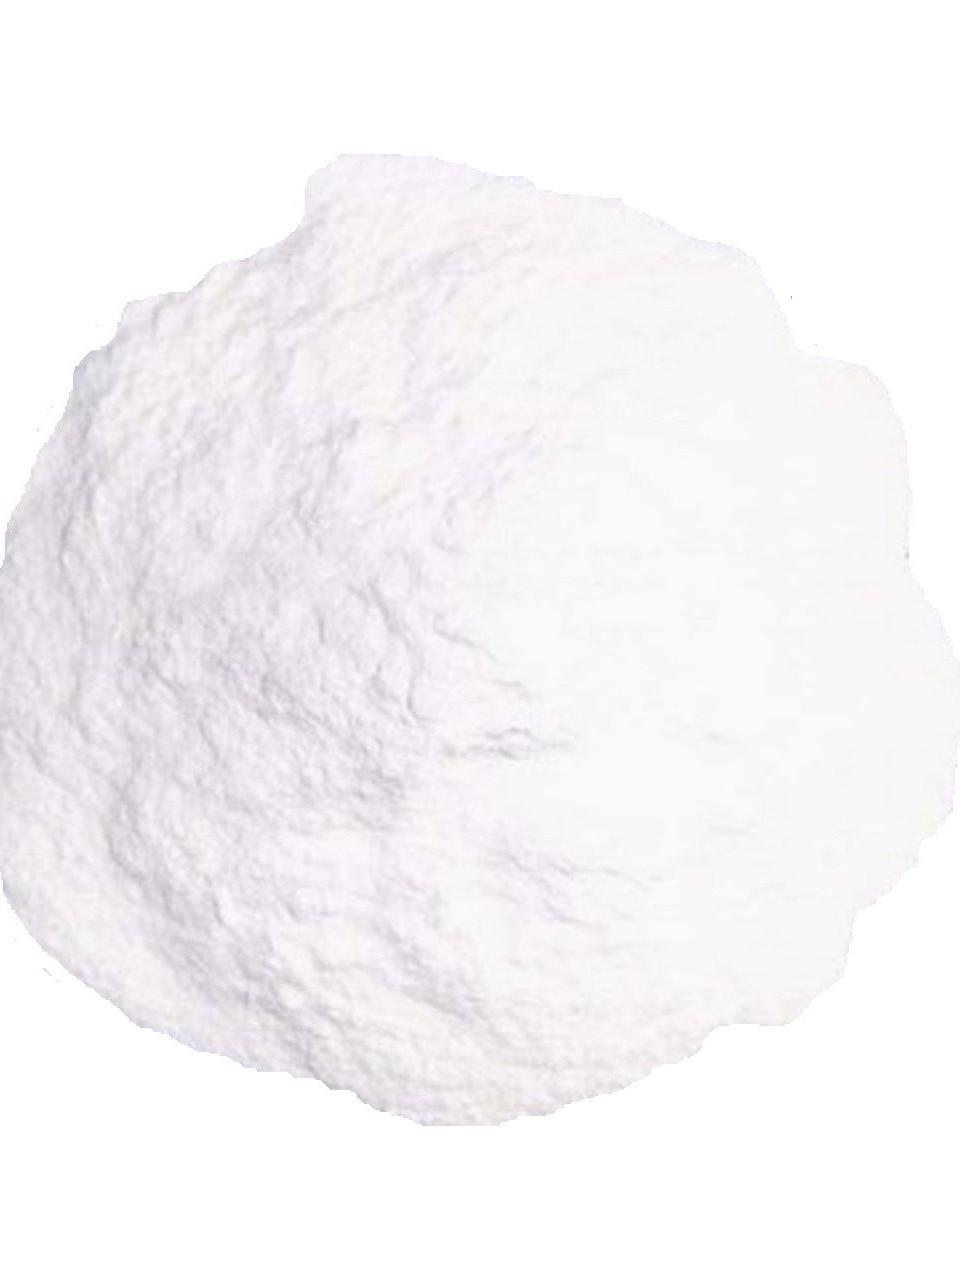 Dalkem Carrageenan Powder IC-604 Food Grade for Ice Cream and Dairy  Products